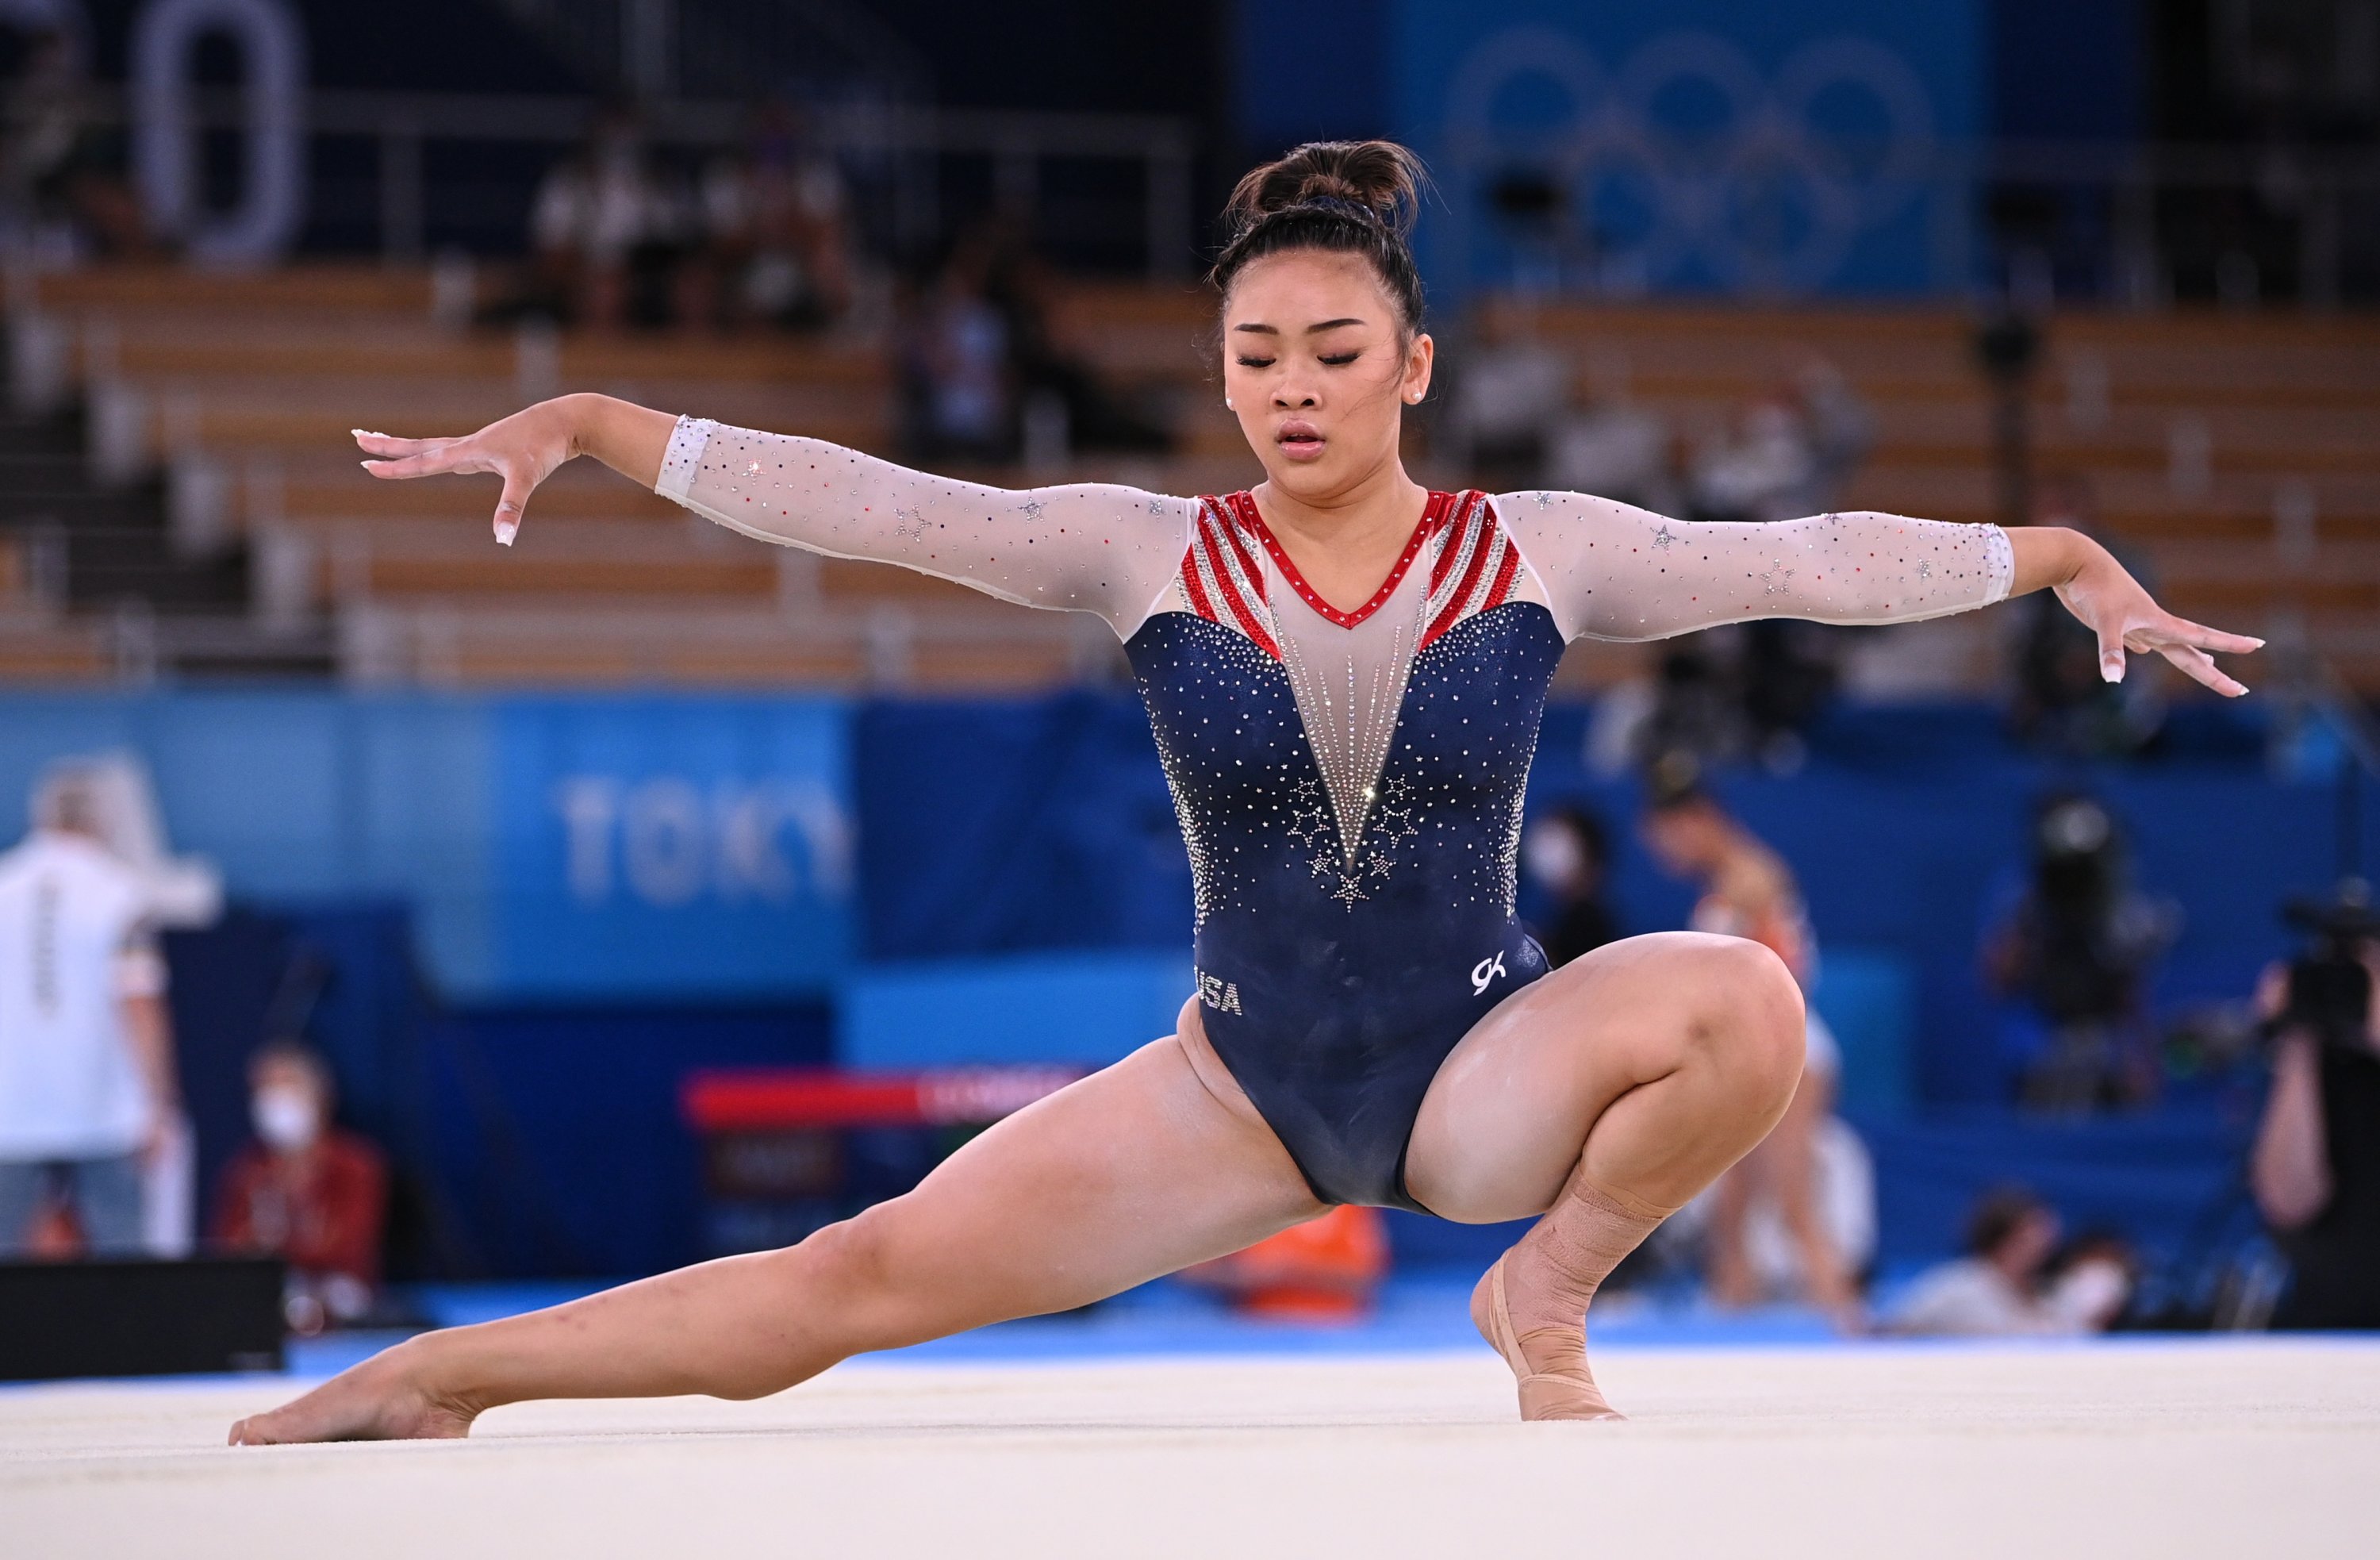 U.S.'s Sunisa Lee in action during floor exercise at the Tokyo 2020 Olympics gymnastics women's individual all-around final, Ariake Gymnastics Center, Tokyo, Japan, July 29, 2021.